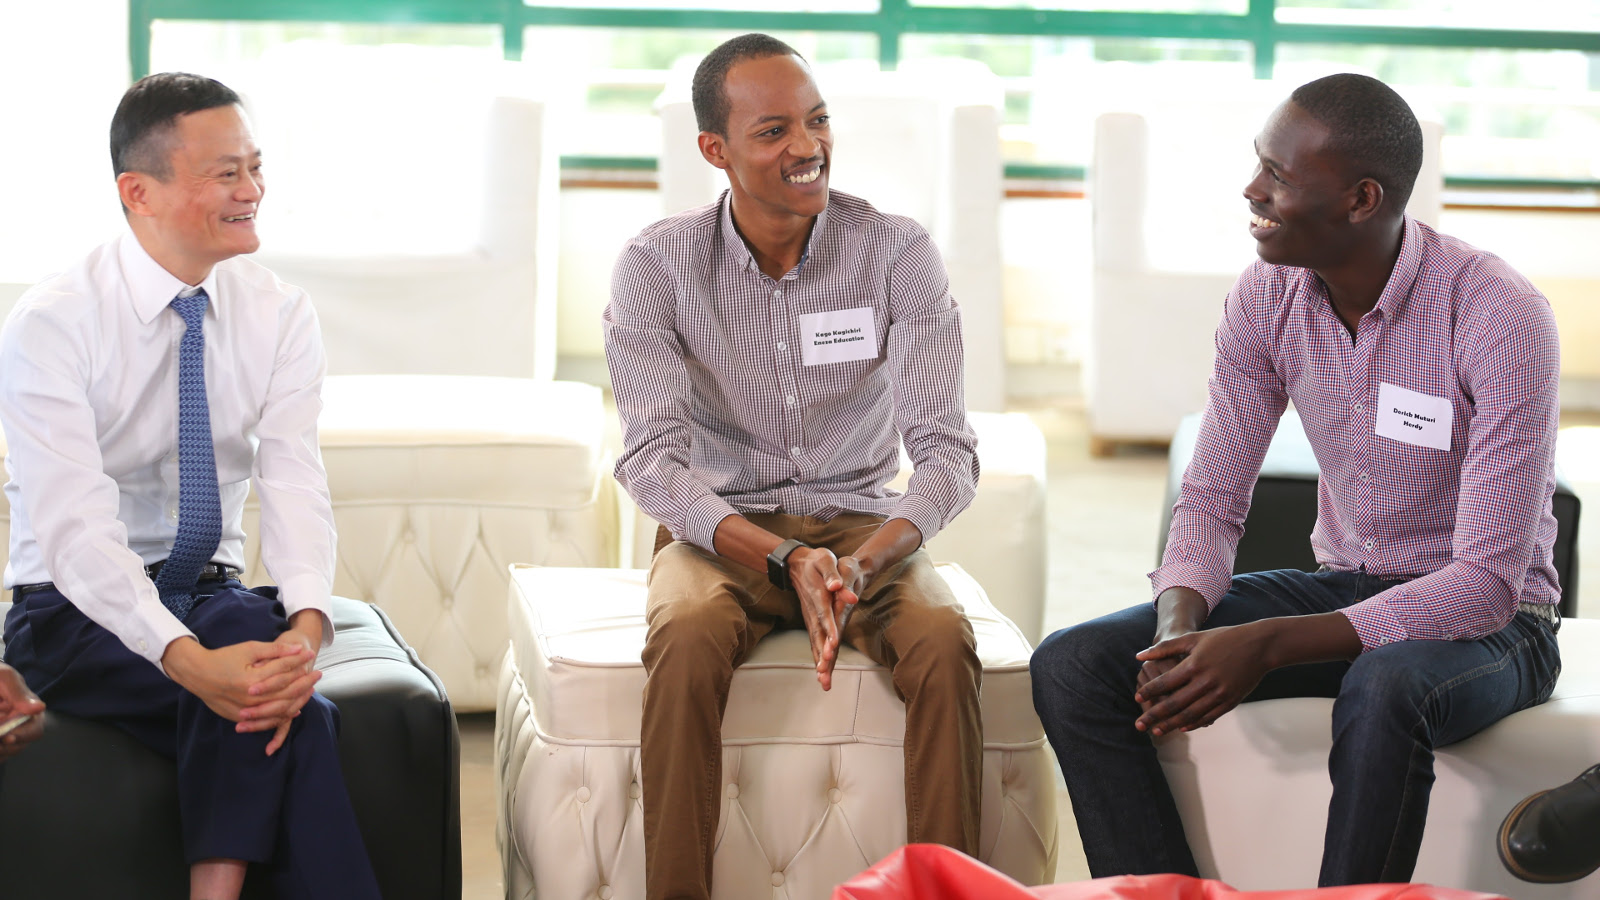 Nairobi-based accelerator Nailab is Africa Netpreneur Prize Initiative ’s continental and East African partner and will work with three regional partners NINE (Nigeria), RiseUp (Egypt), 22 On Sloane (South Africa) on the event.